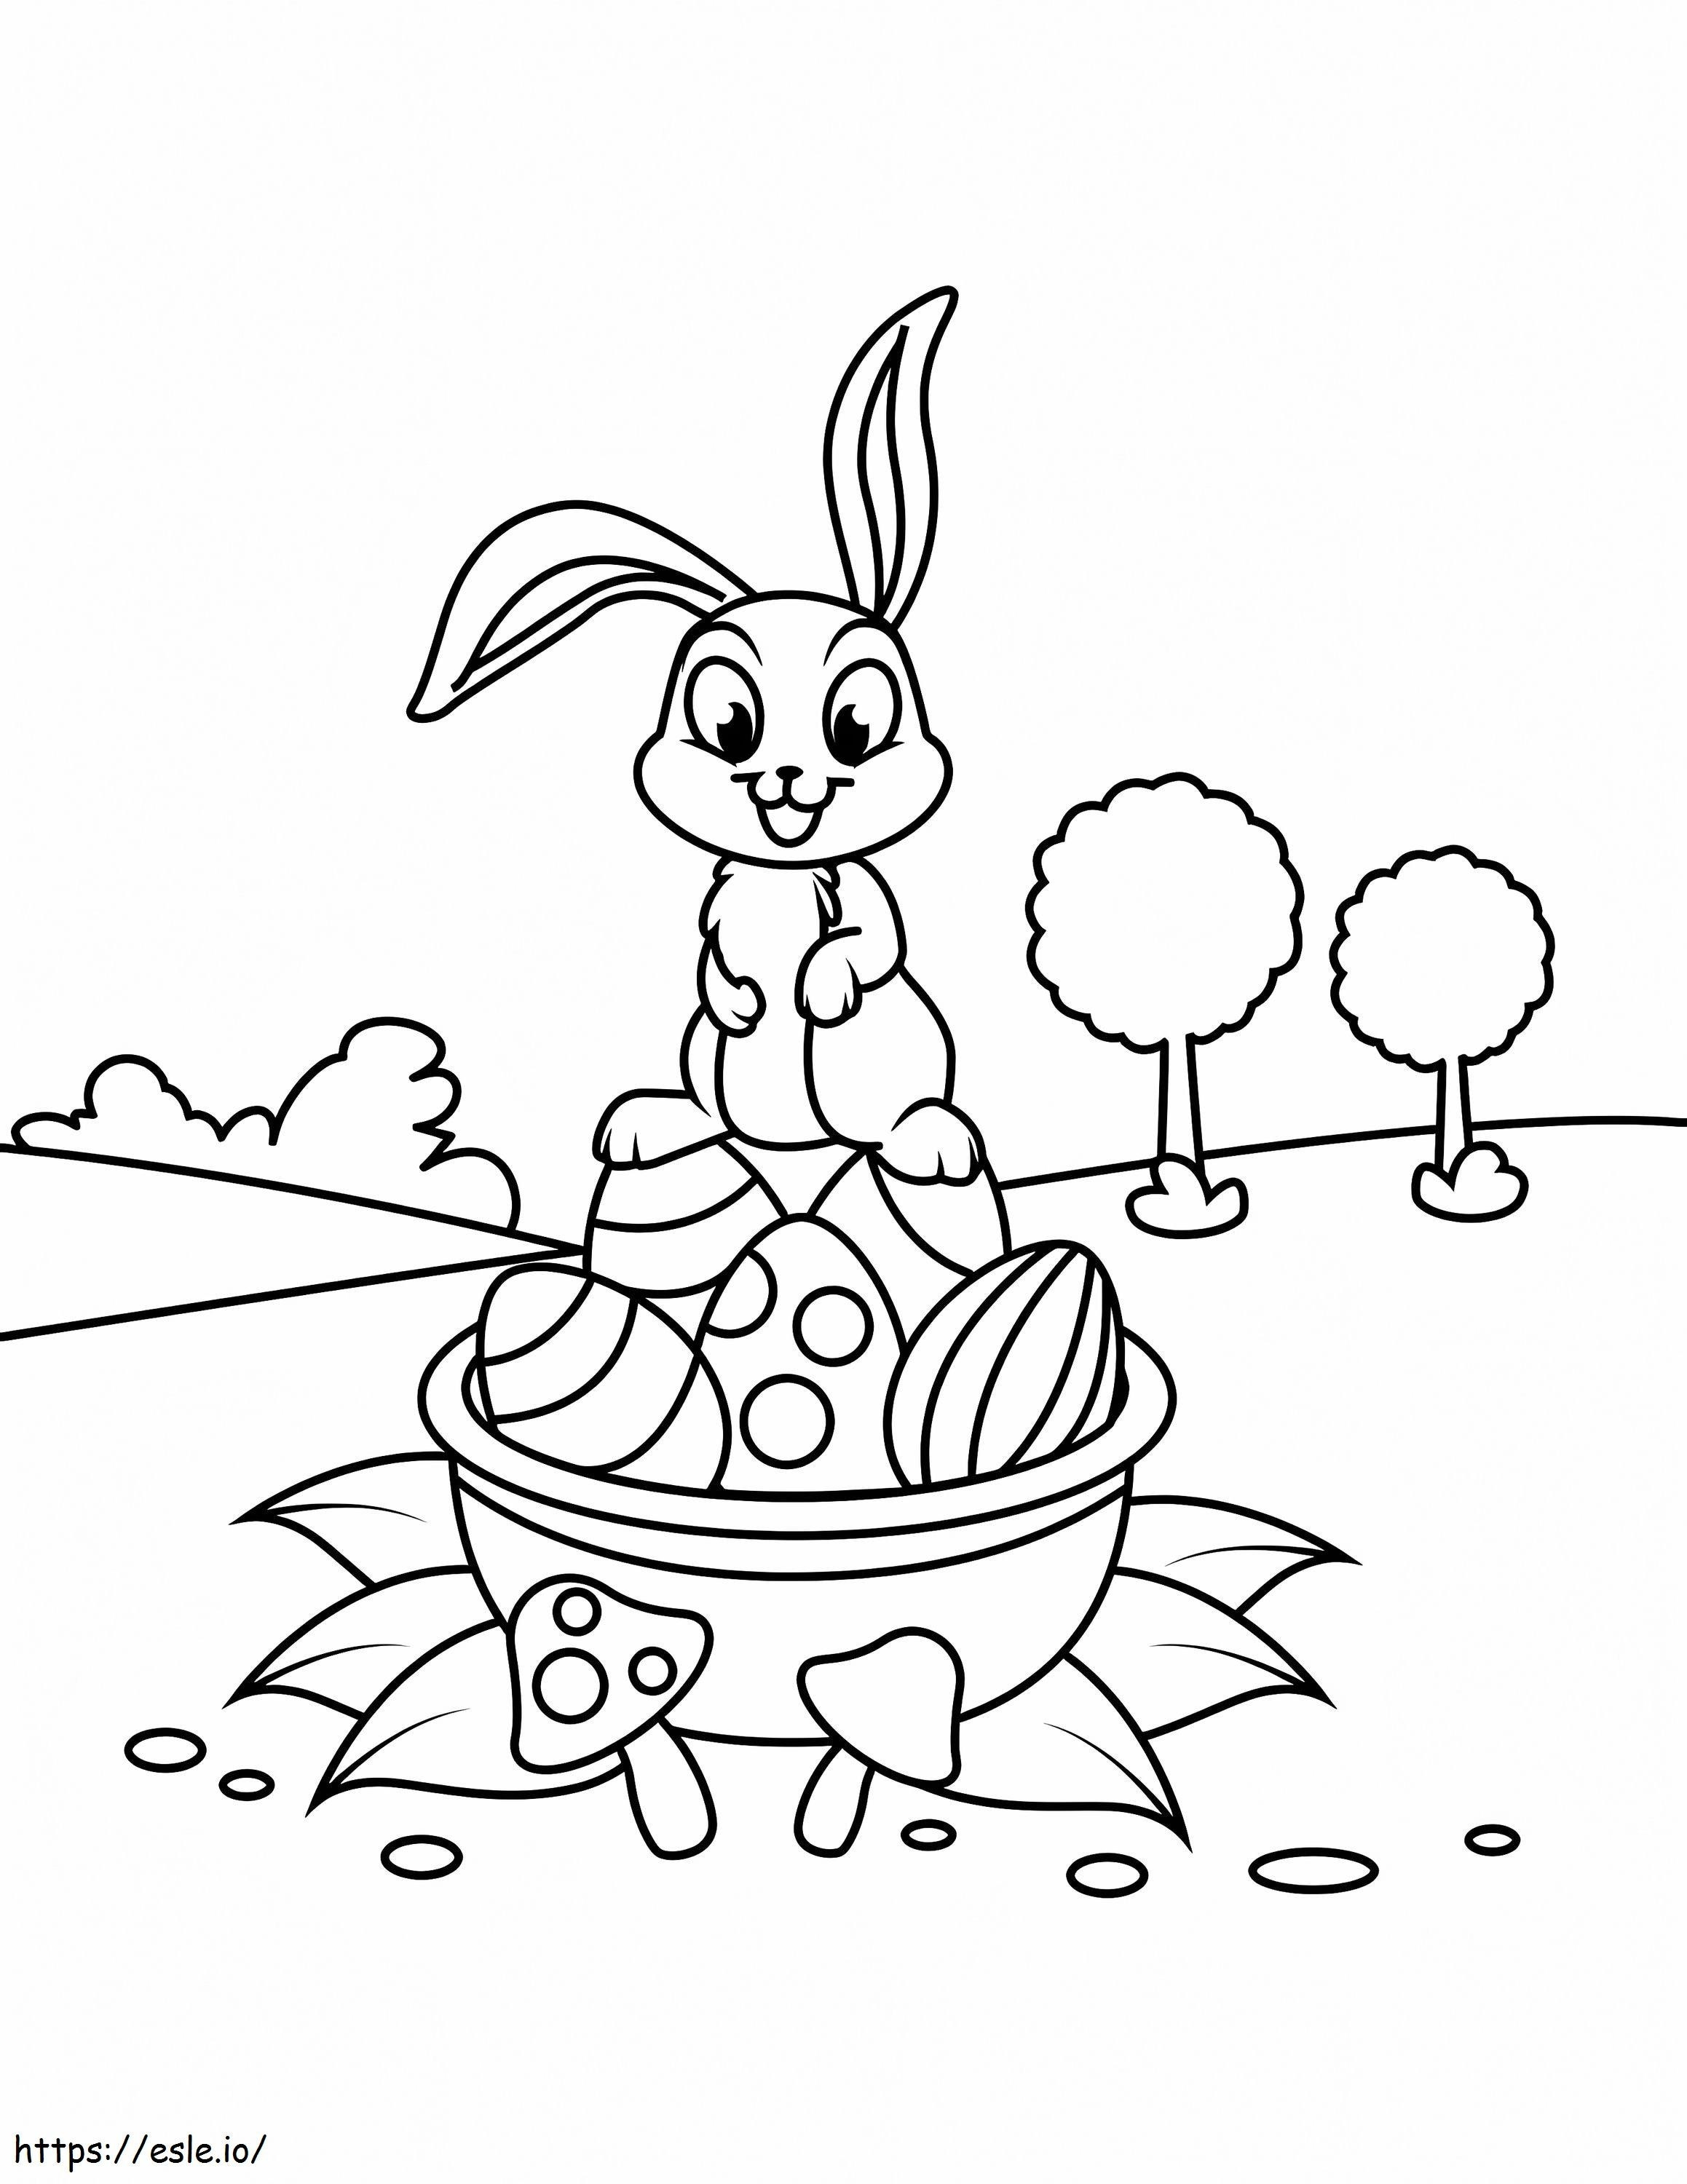 Easter Bunny With Eggs coloring page